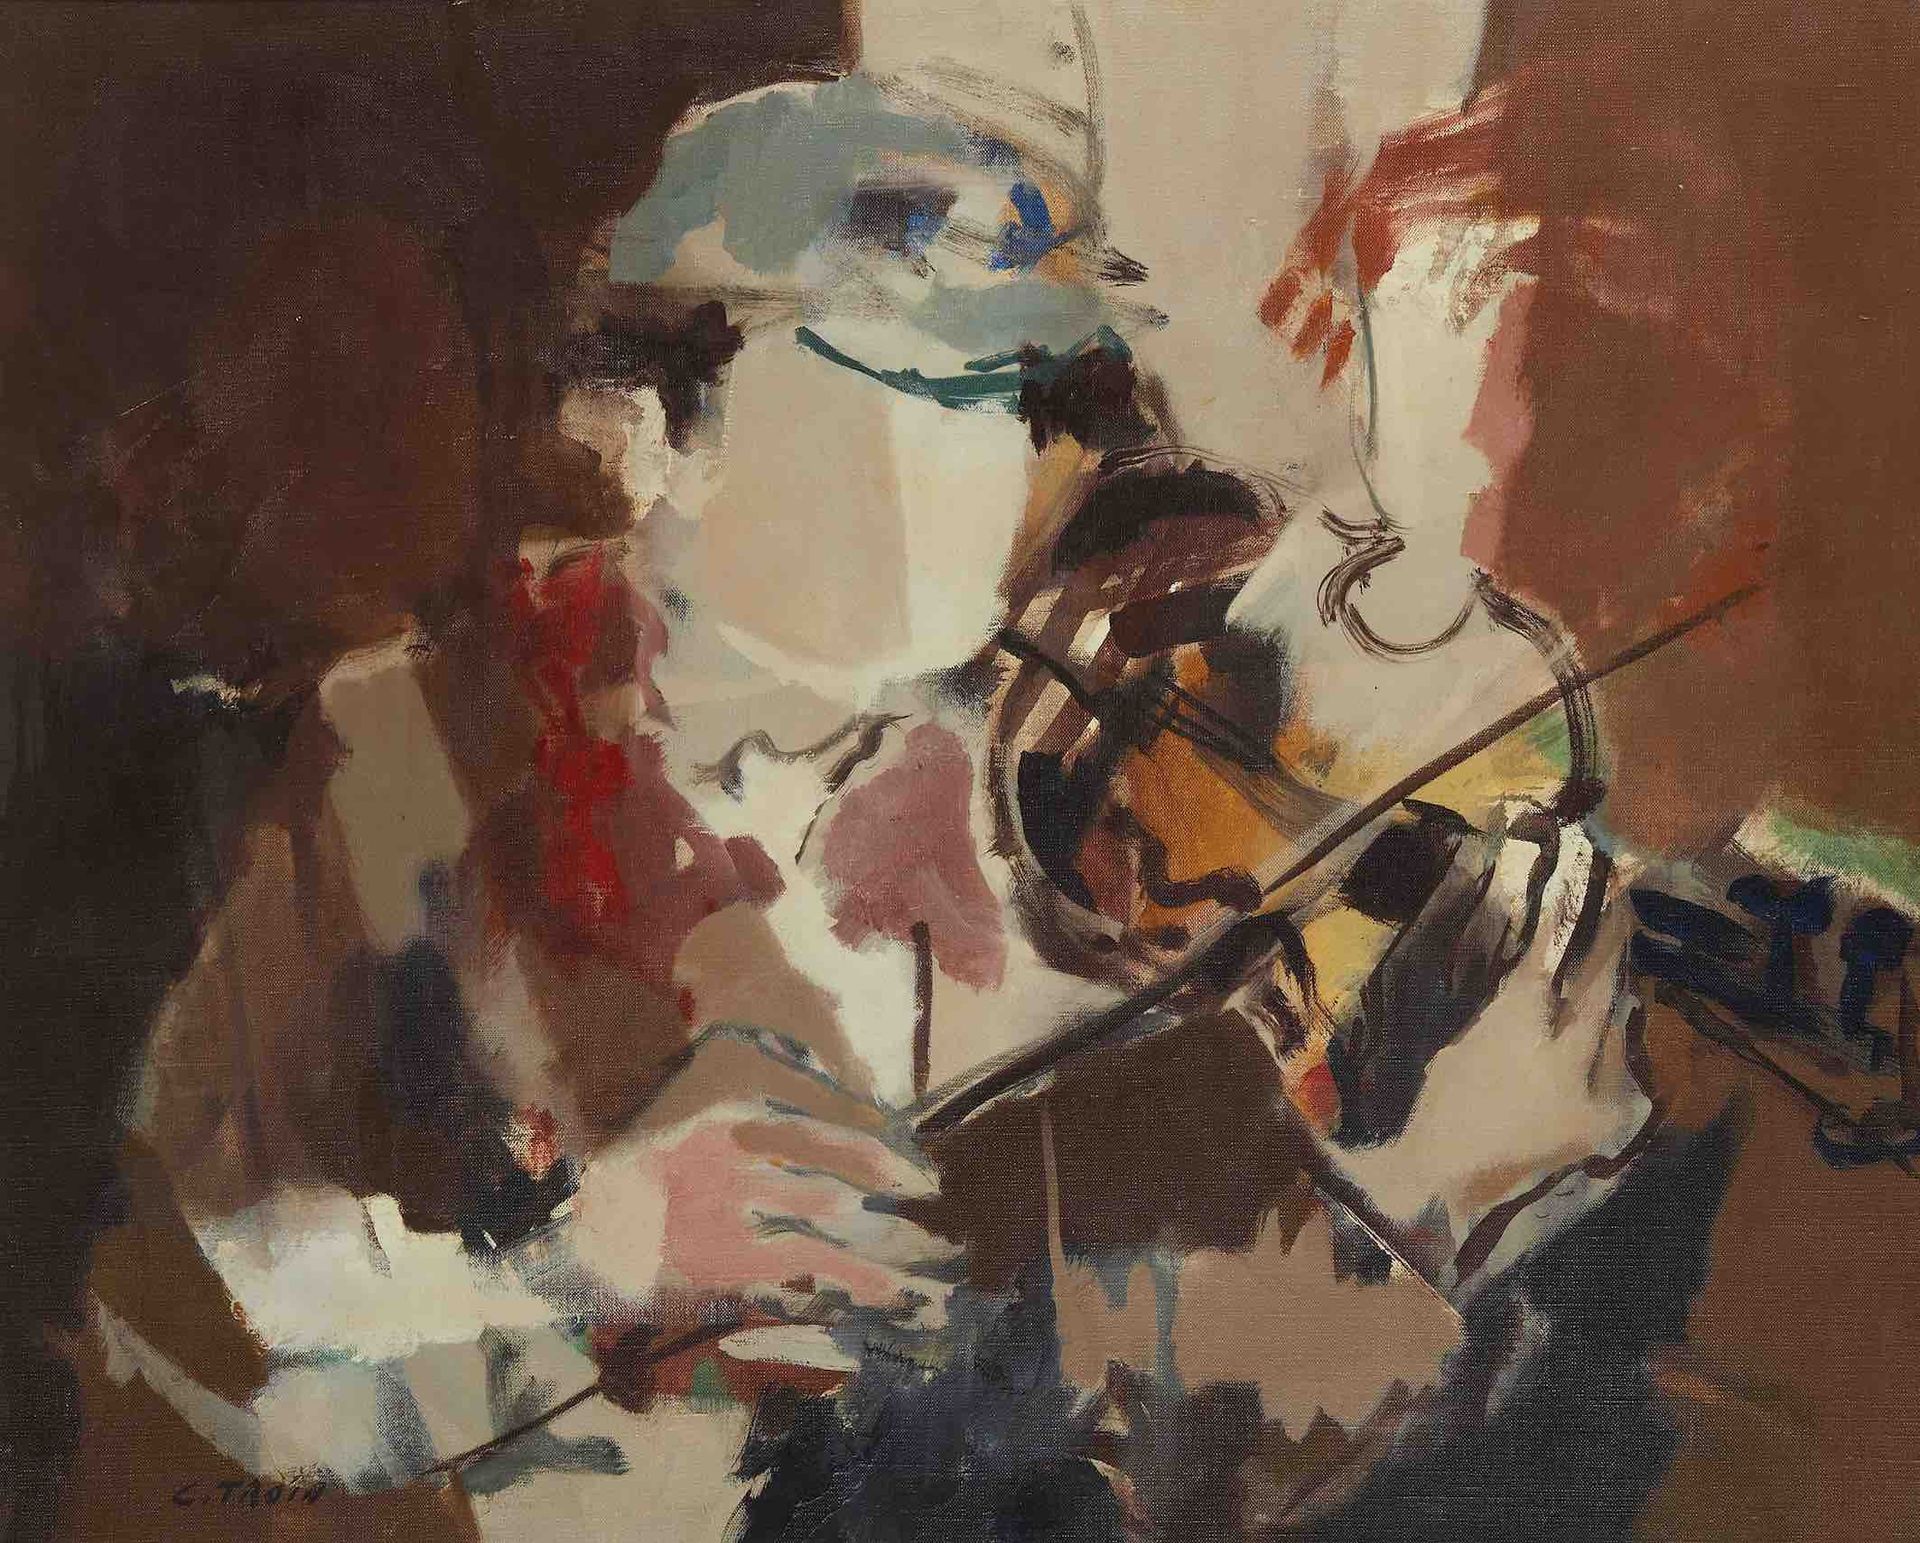 Null C. TROIN (20th century)

The violinist

Oil on canvas, signed lower right

&hellip;